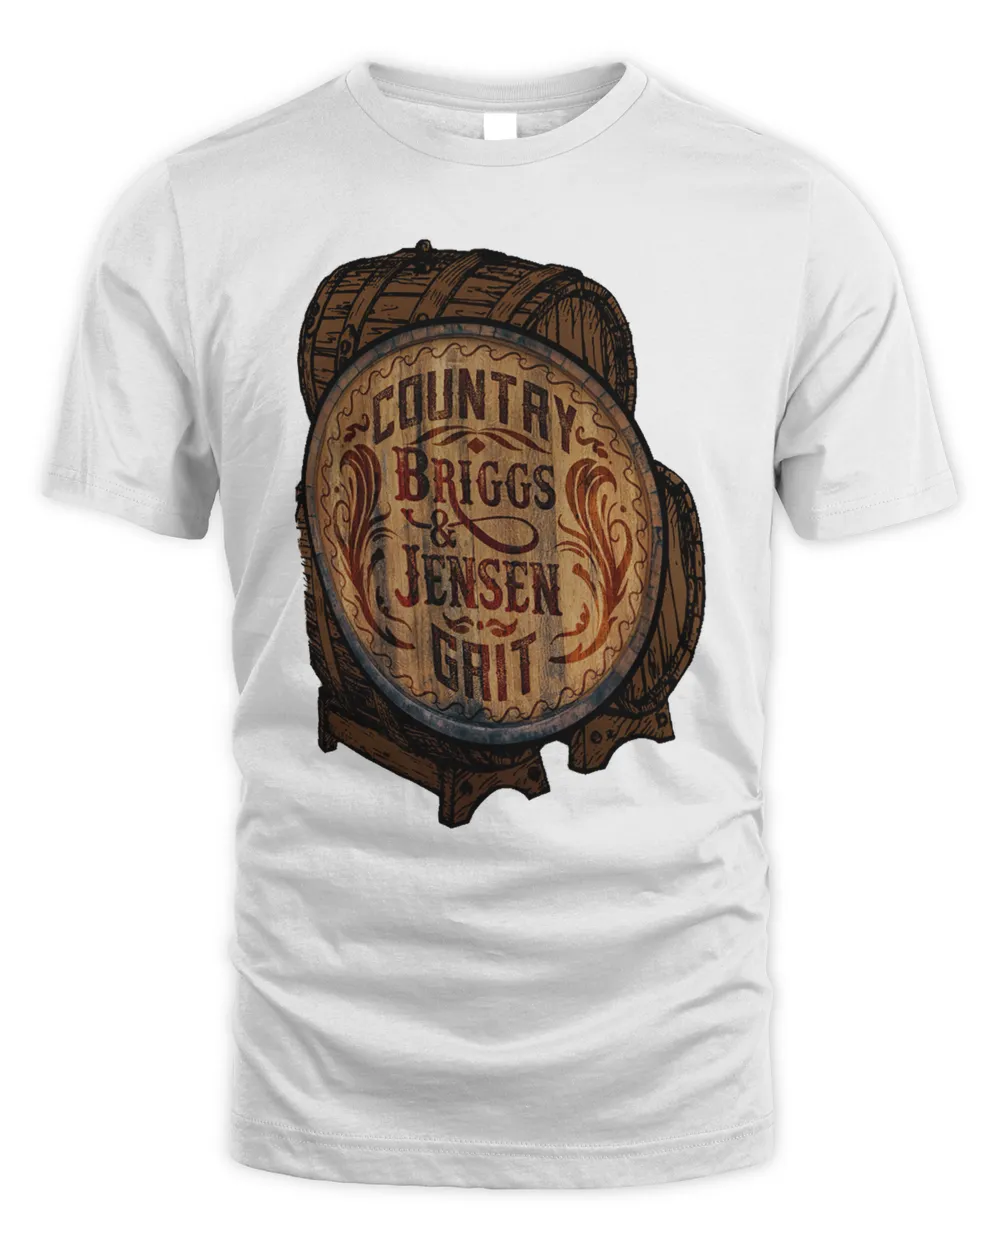 Briggs and Jensen country grit shirt